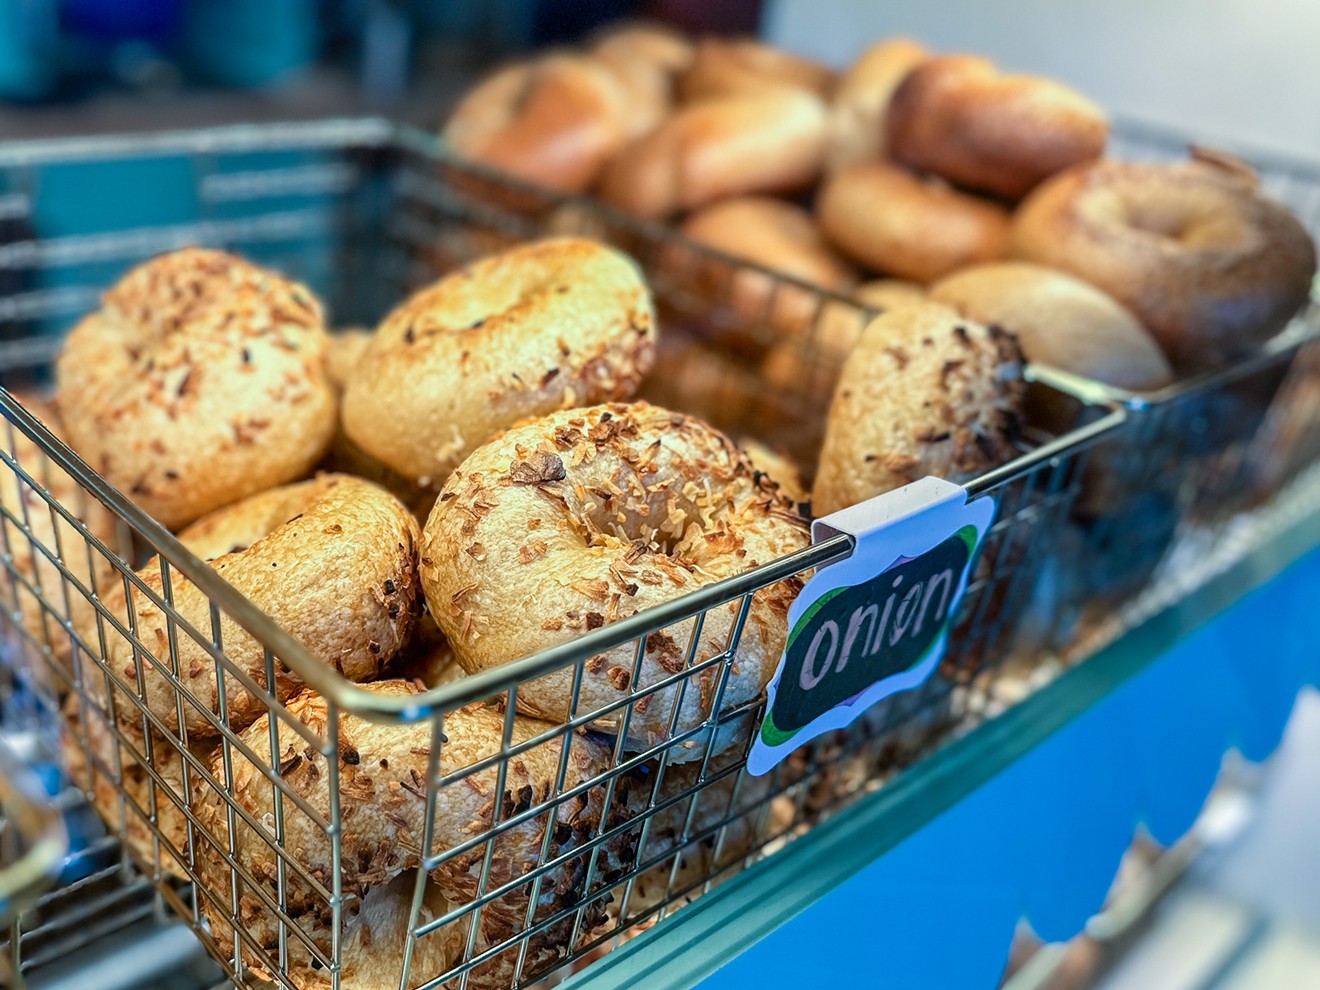 Lubbies is currently in its soft opening and has freshly baked bagels and homemade schmears available at the old 20 Feet Seafood Joint location.